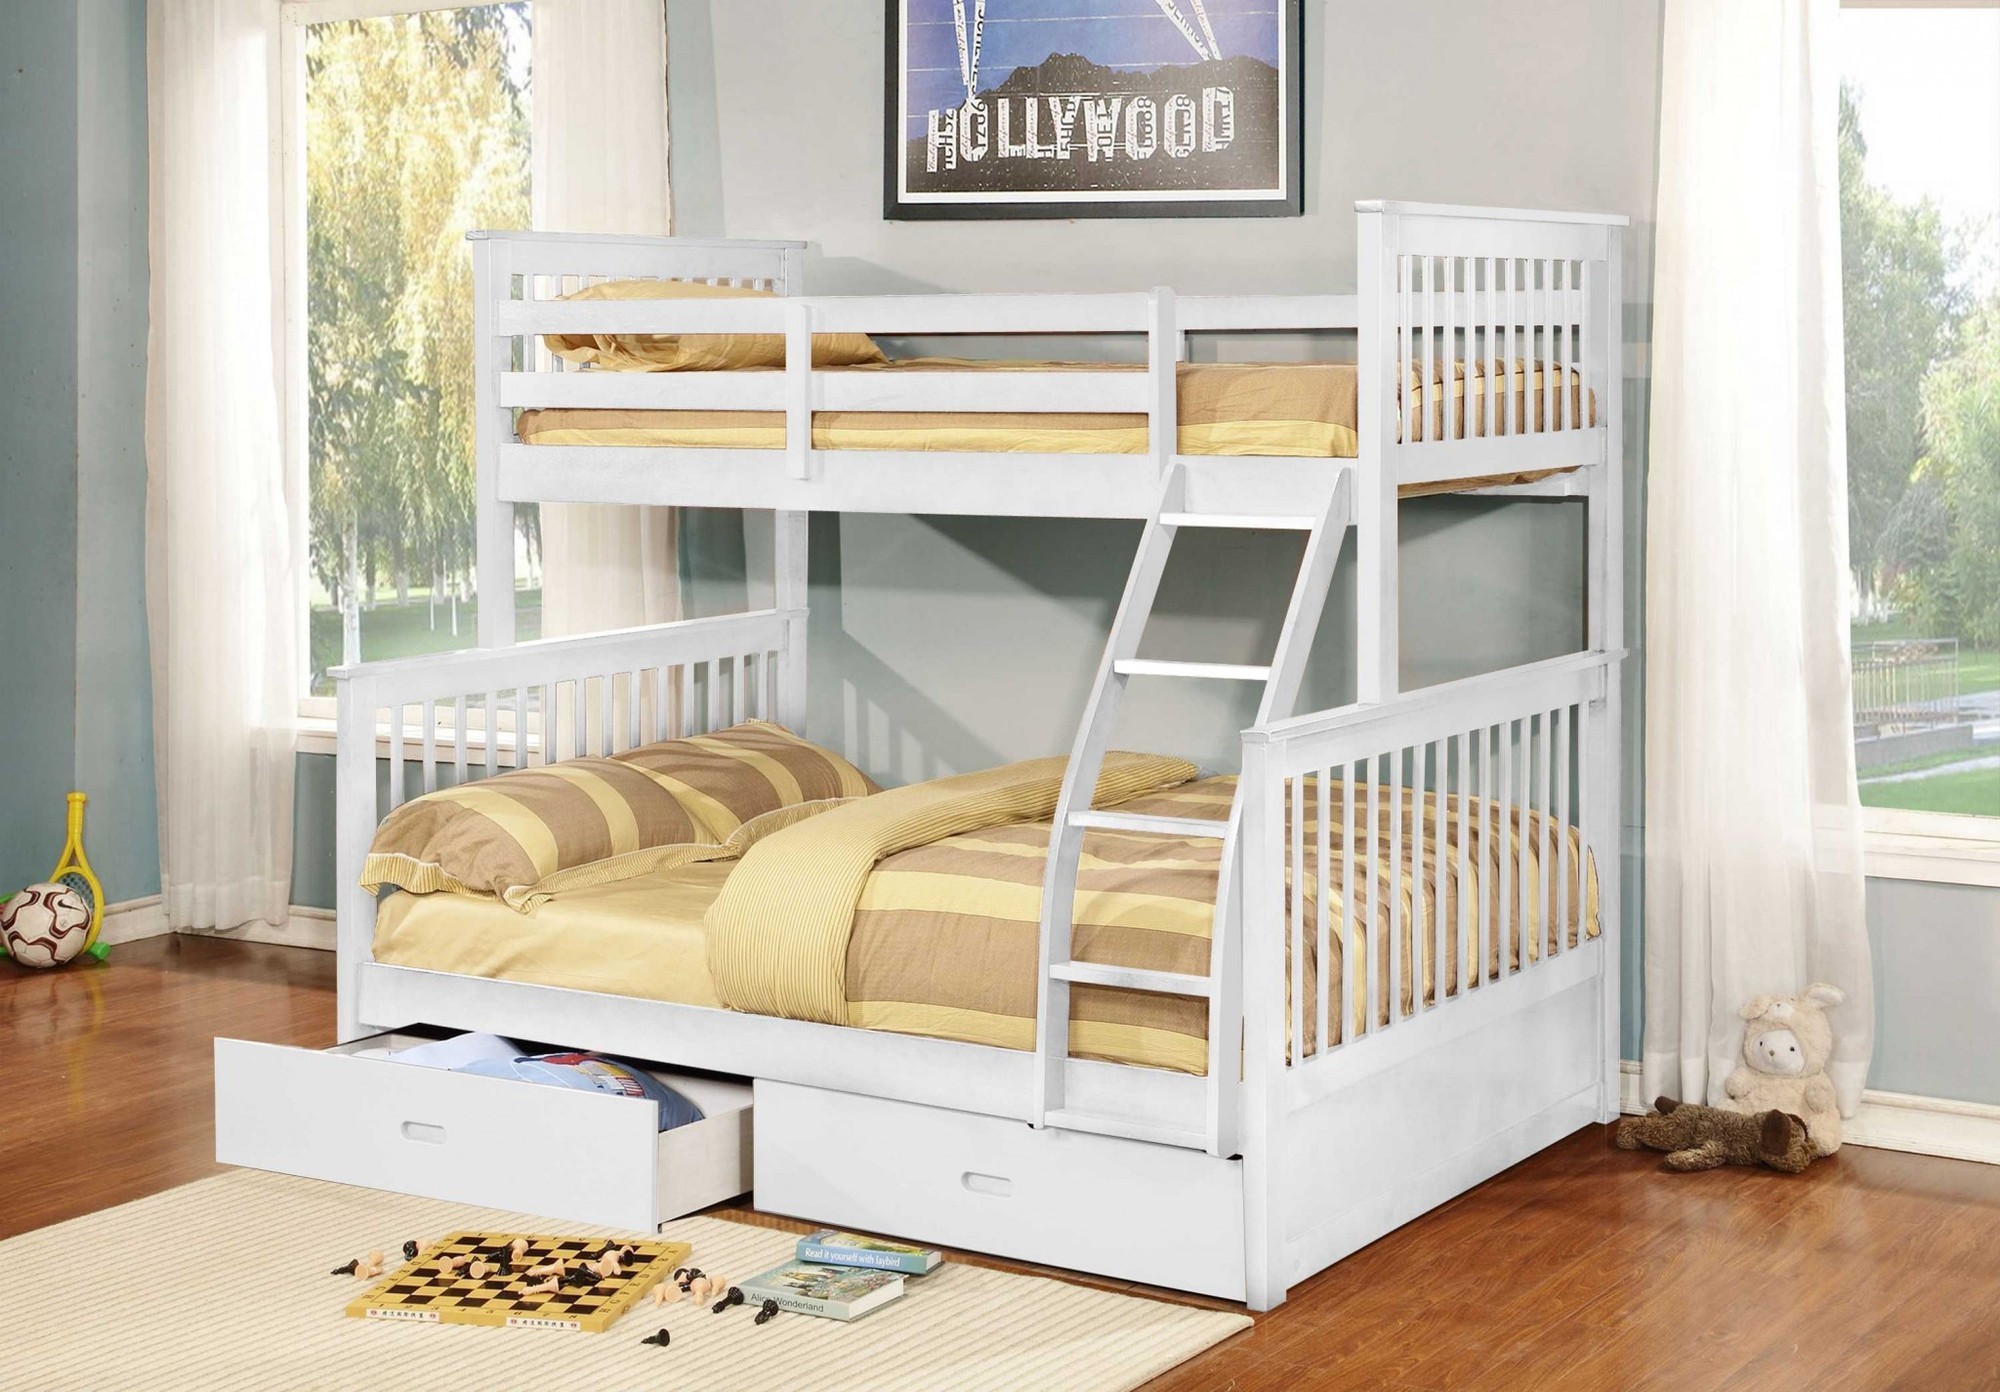 80.5" X 41.5-57.5" X 70.25" White Manufactured Wood and Solid Wood Twin or Full Bunk Bed with 2 Drawers